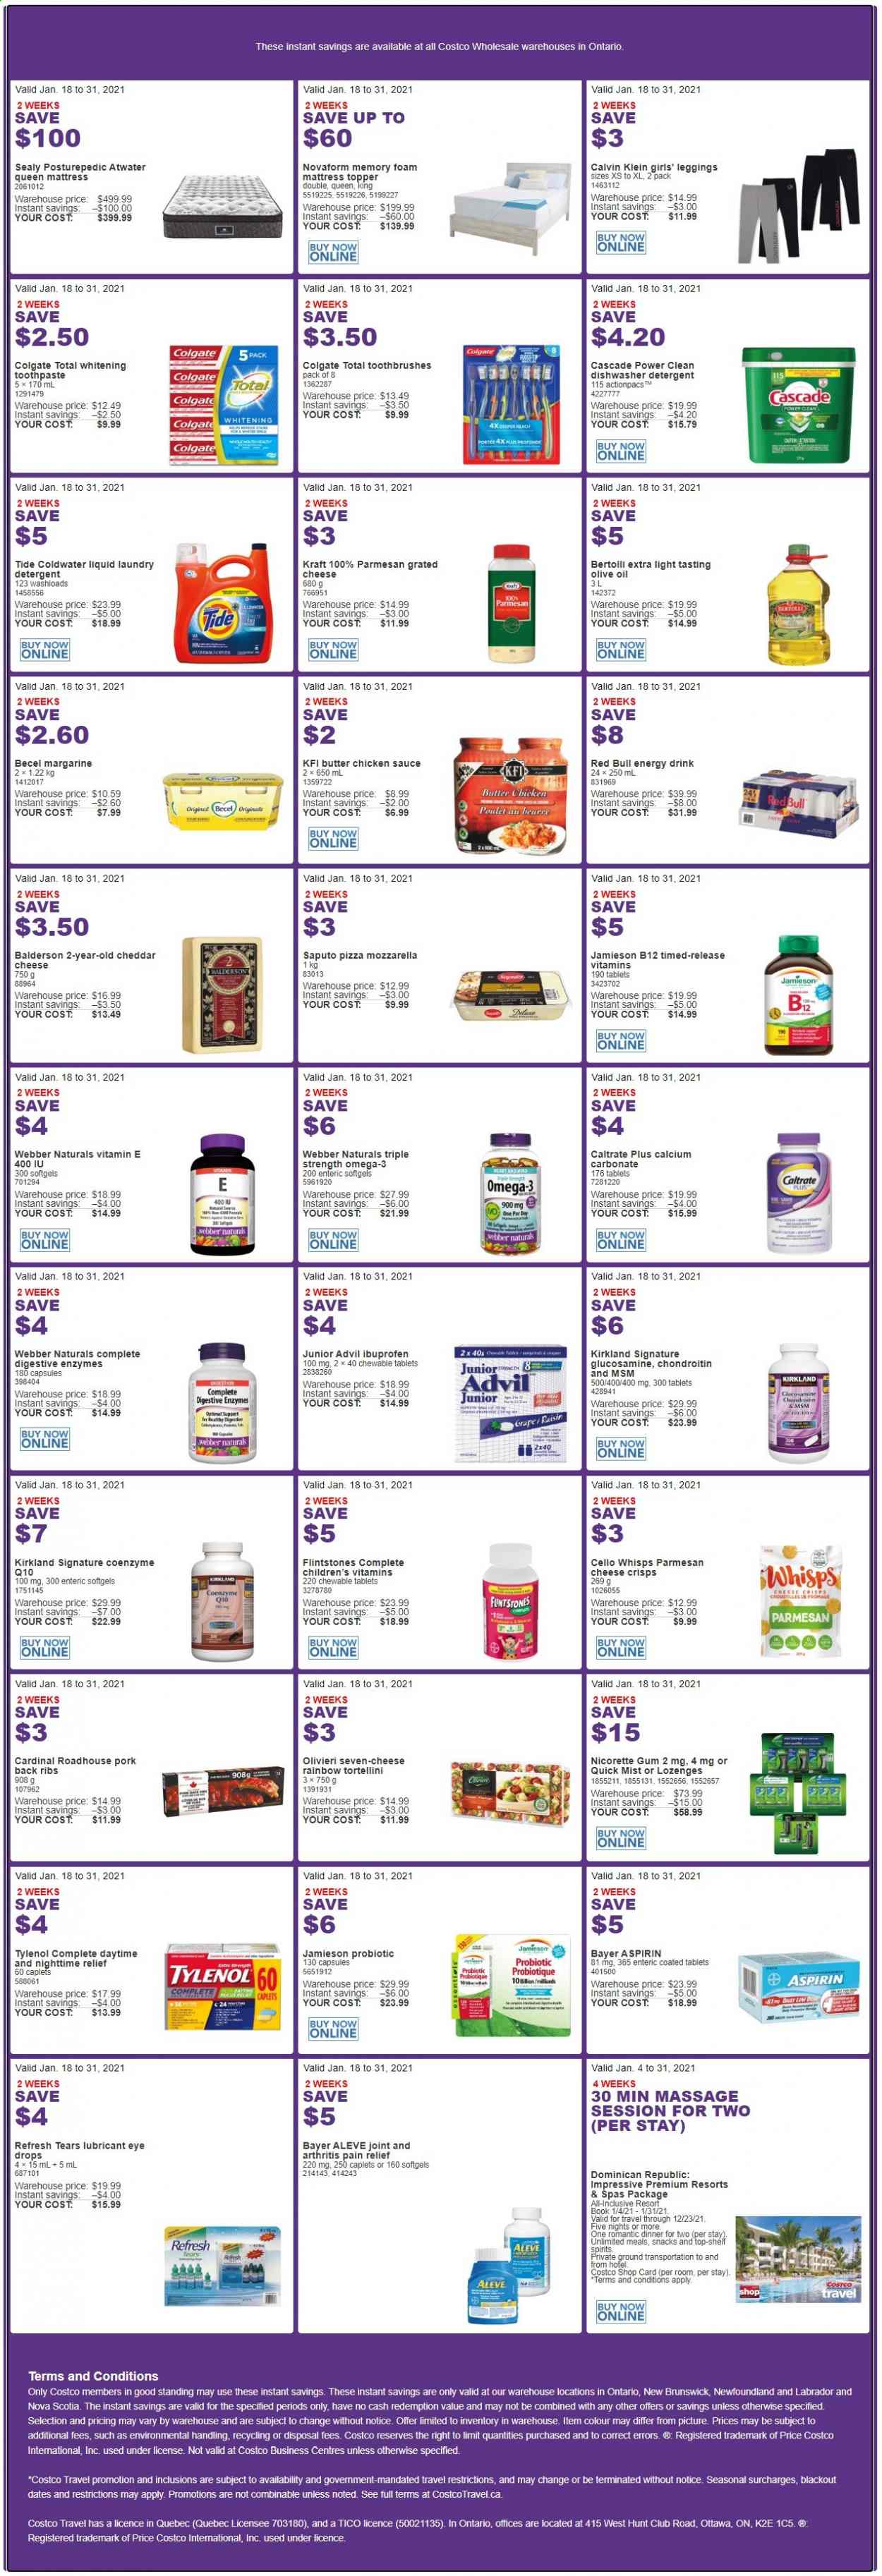 thumbnail - Costco Flyer - January 18, 2021 - January 31, 2021 - Sales products - pizza, sauce, tortellini, Kraft®, Bertolli, cheddar, parmesan, grated cheese, margarine, snack, Digestive, olive oil, oil, energy drink, Red Bull, pork meat, pork ribs, pork back ribs, Tide, laundry detergent, Cascade, toothpaste, lubricant, Cello, book, mattress protector, topper, foam mattress, leggings, blackout, pain relief, Aleve, glucosamine, Nicorette, Tylenol, Ibuprofen, Omega-3, eye drops, Advil Rapid, Nicorette Gum, aspirin, Bayer. Page 1.